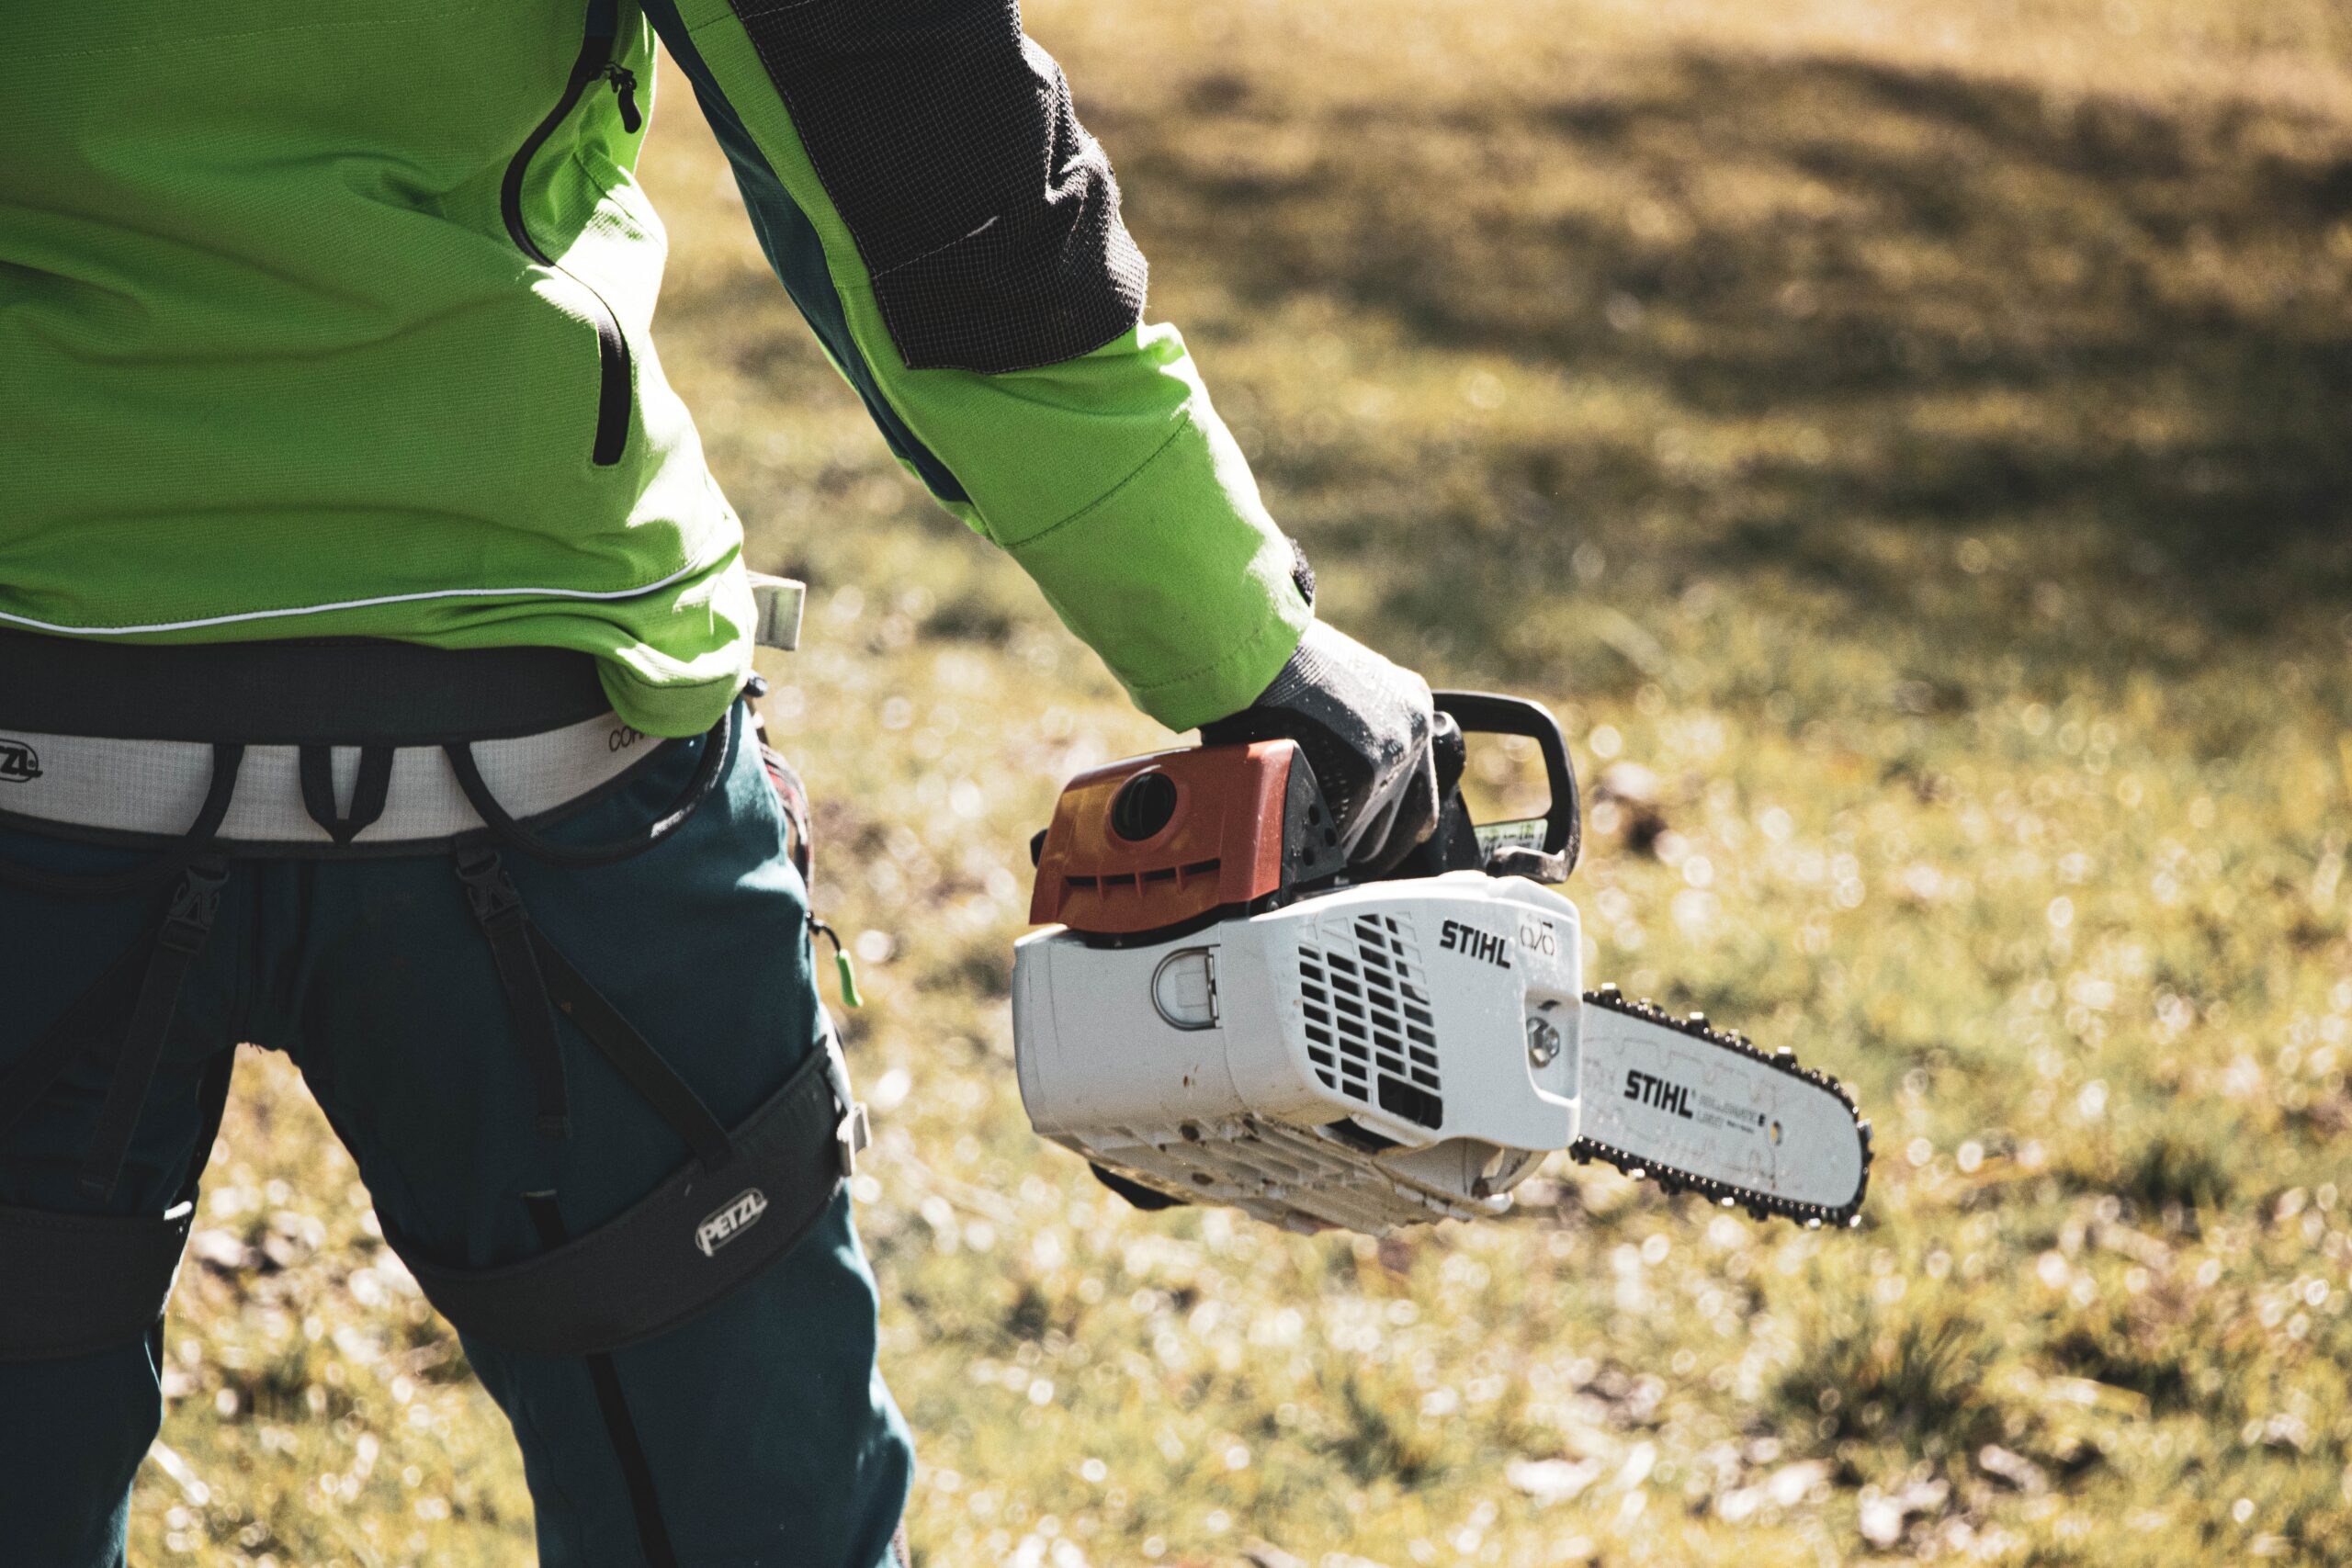 Chain Saw Rental: Tips for Renting and Using a Chainsaw